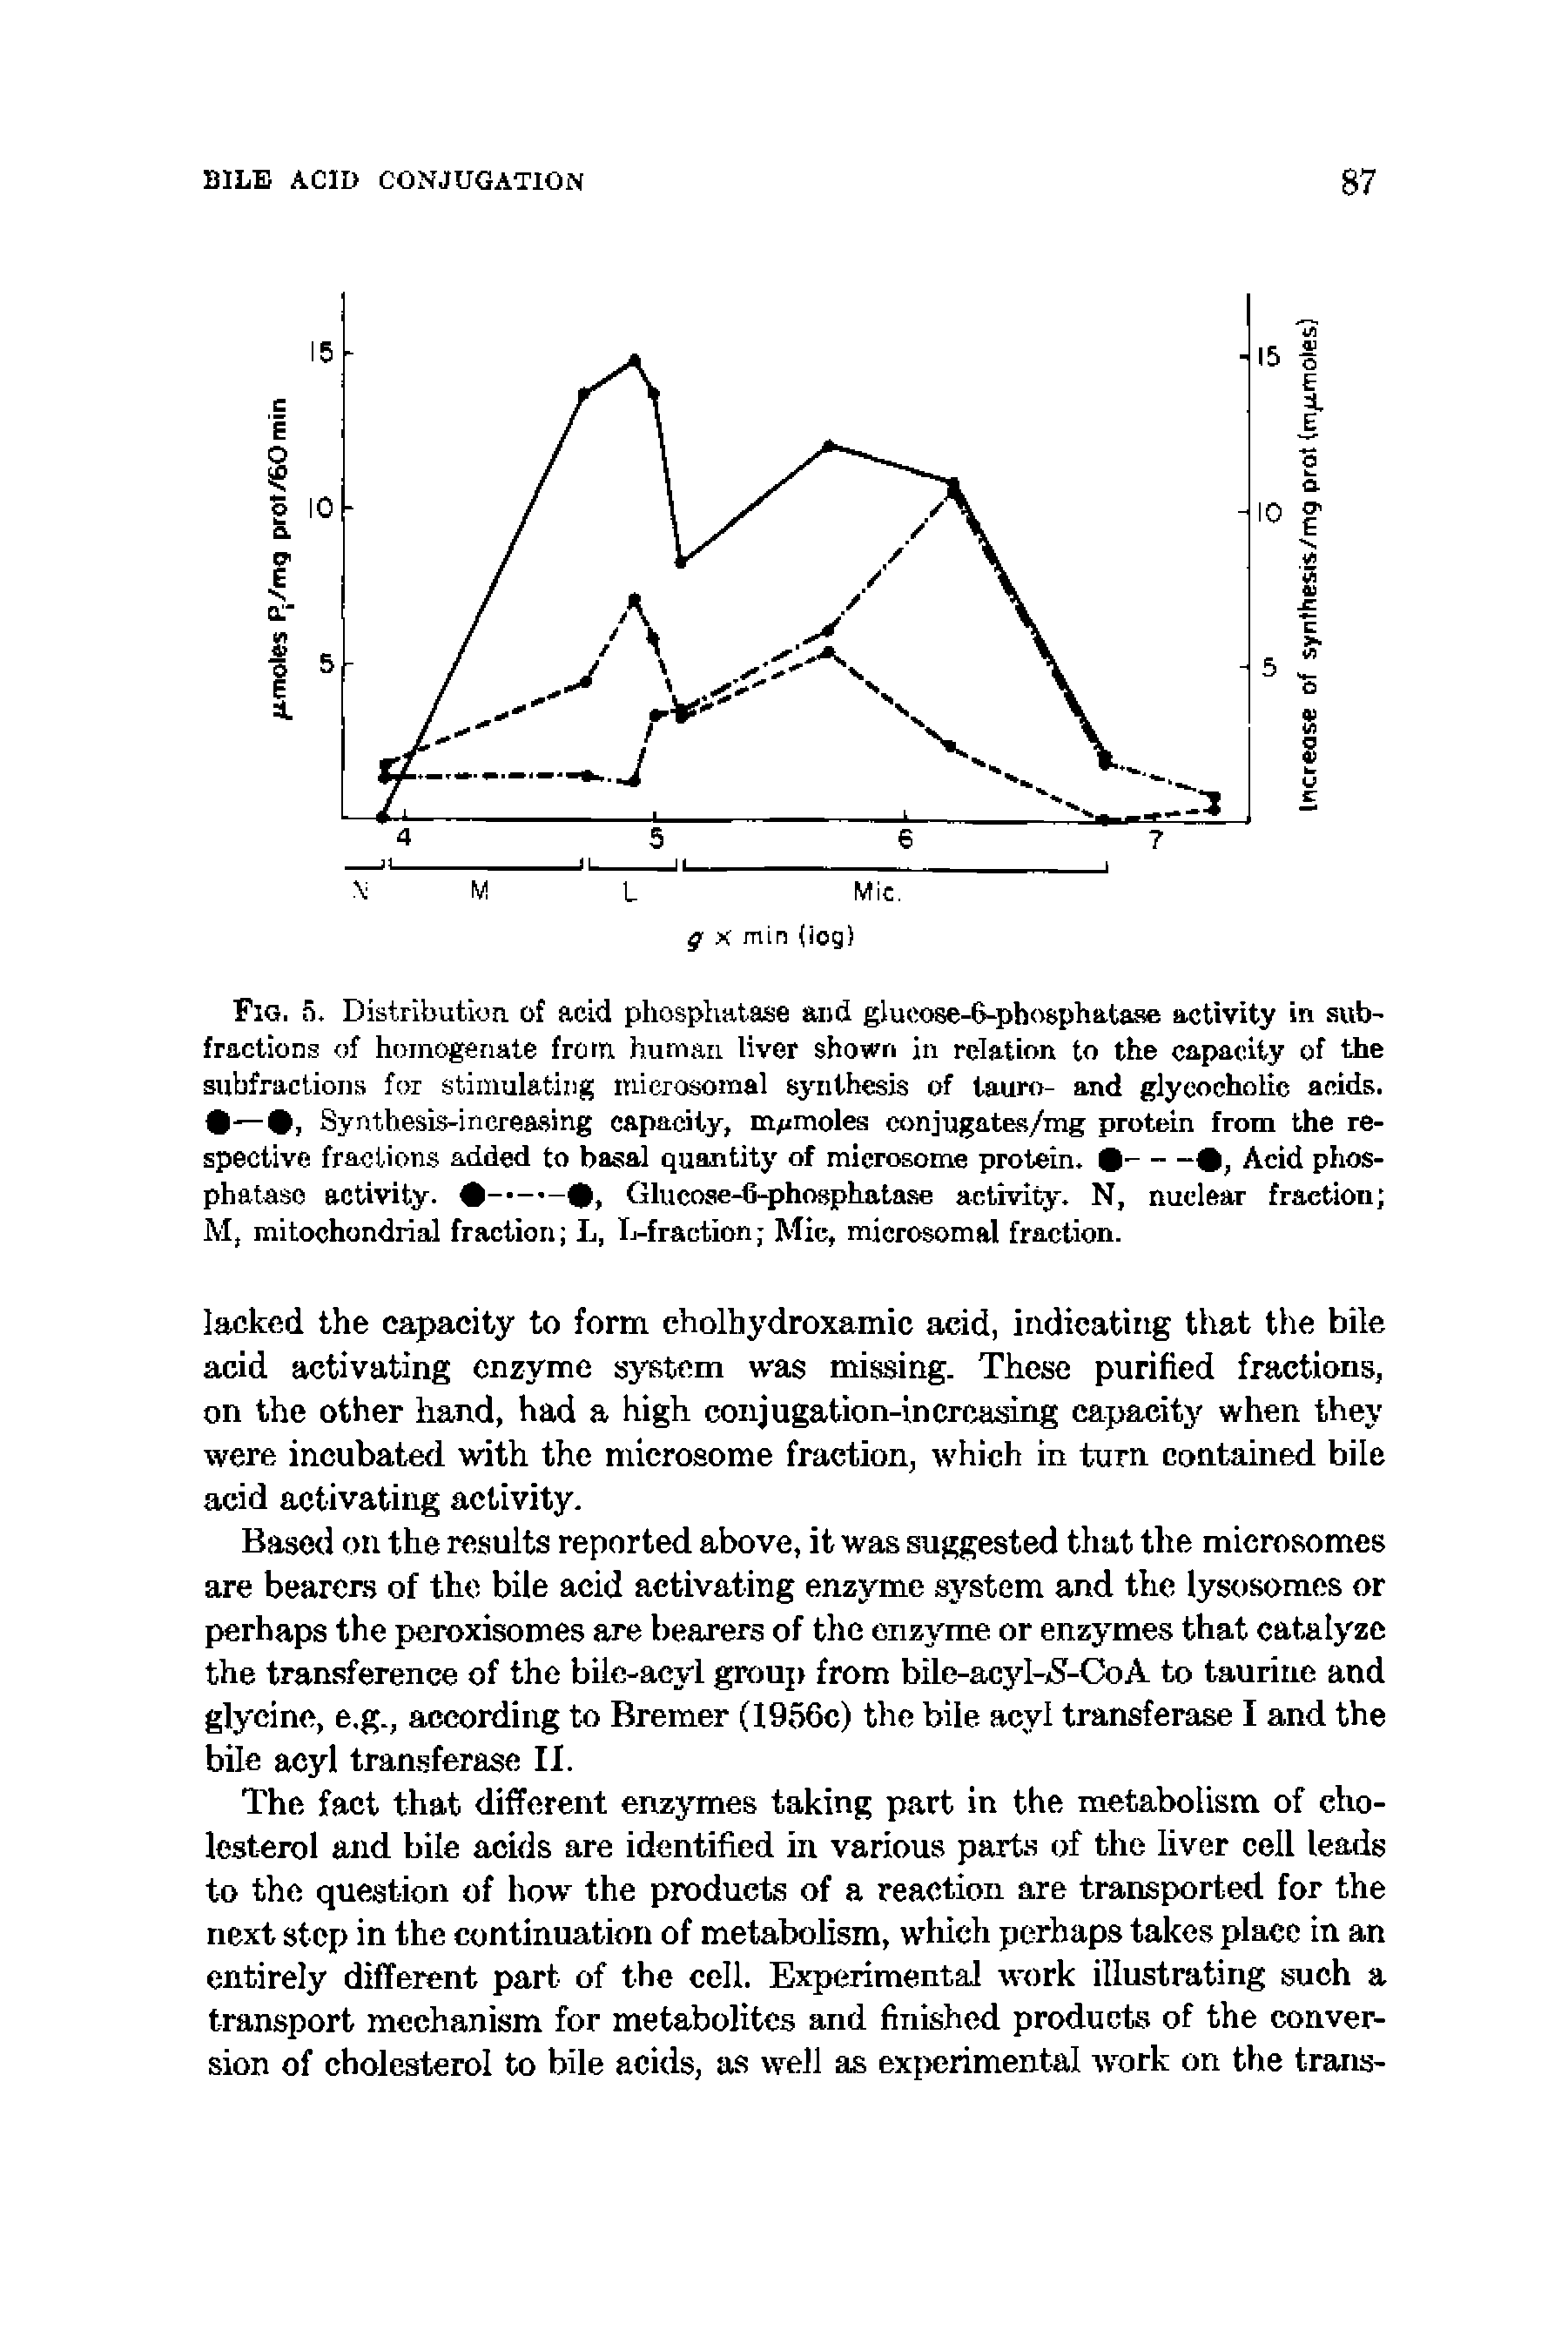 Fig. S. Distribution, of acid phosphatase and giucose-6-phosphataae activity in sub-fractions of homogenate frctn human liver shown in relation to the capacity of Uie subfractions for stimulating m.ierosoraal synthesis of tauro- and glyeocholie acids. C— , Synthesis-increasing capacity, m/jmoles conjugates/mg protein from the respective fractions added to basal quantity of microsome protein. ---- , Acid phosphatase activity. Glucose-S hosphataae activity. N, nuclear fraction ...